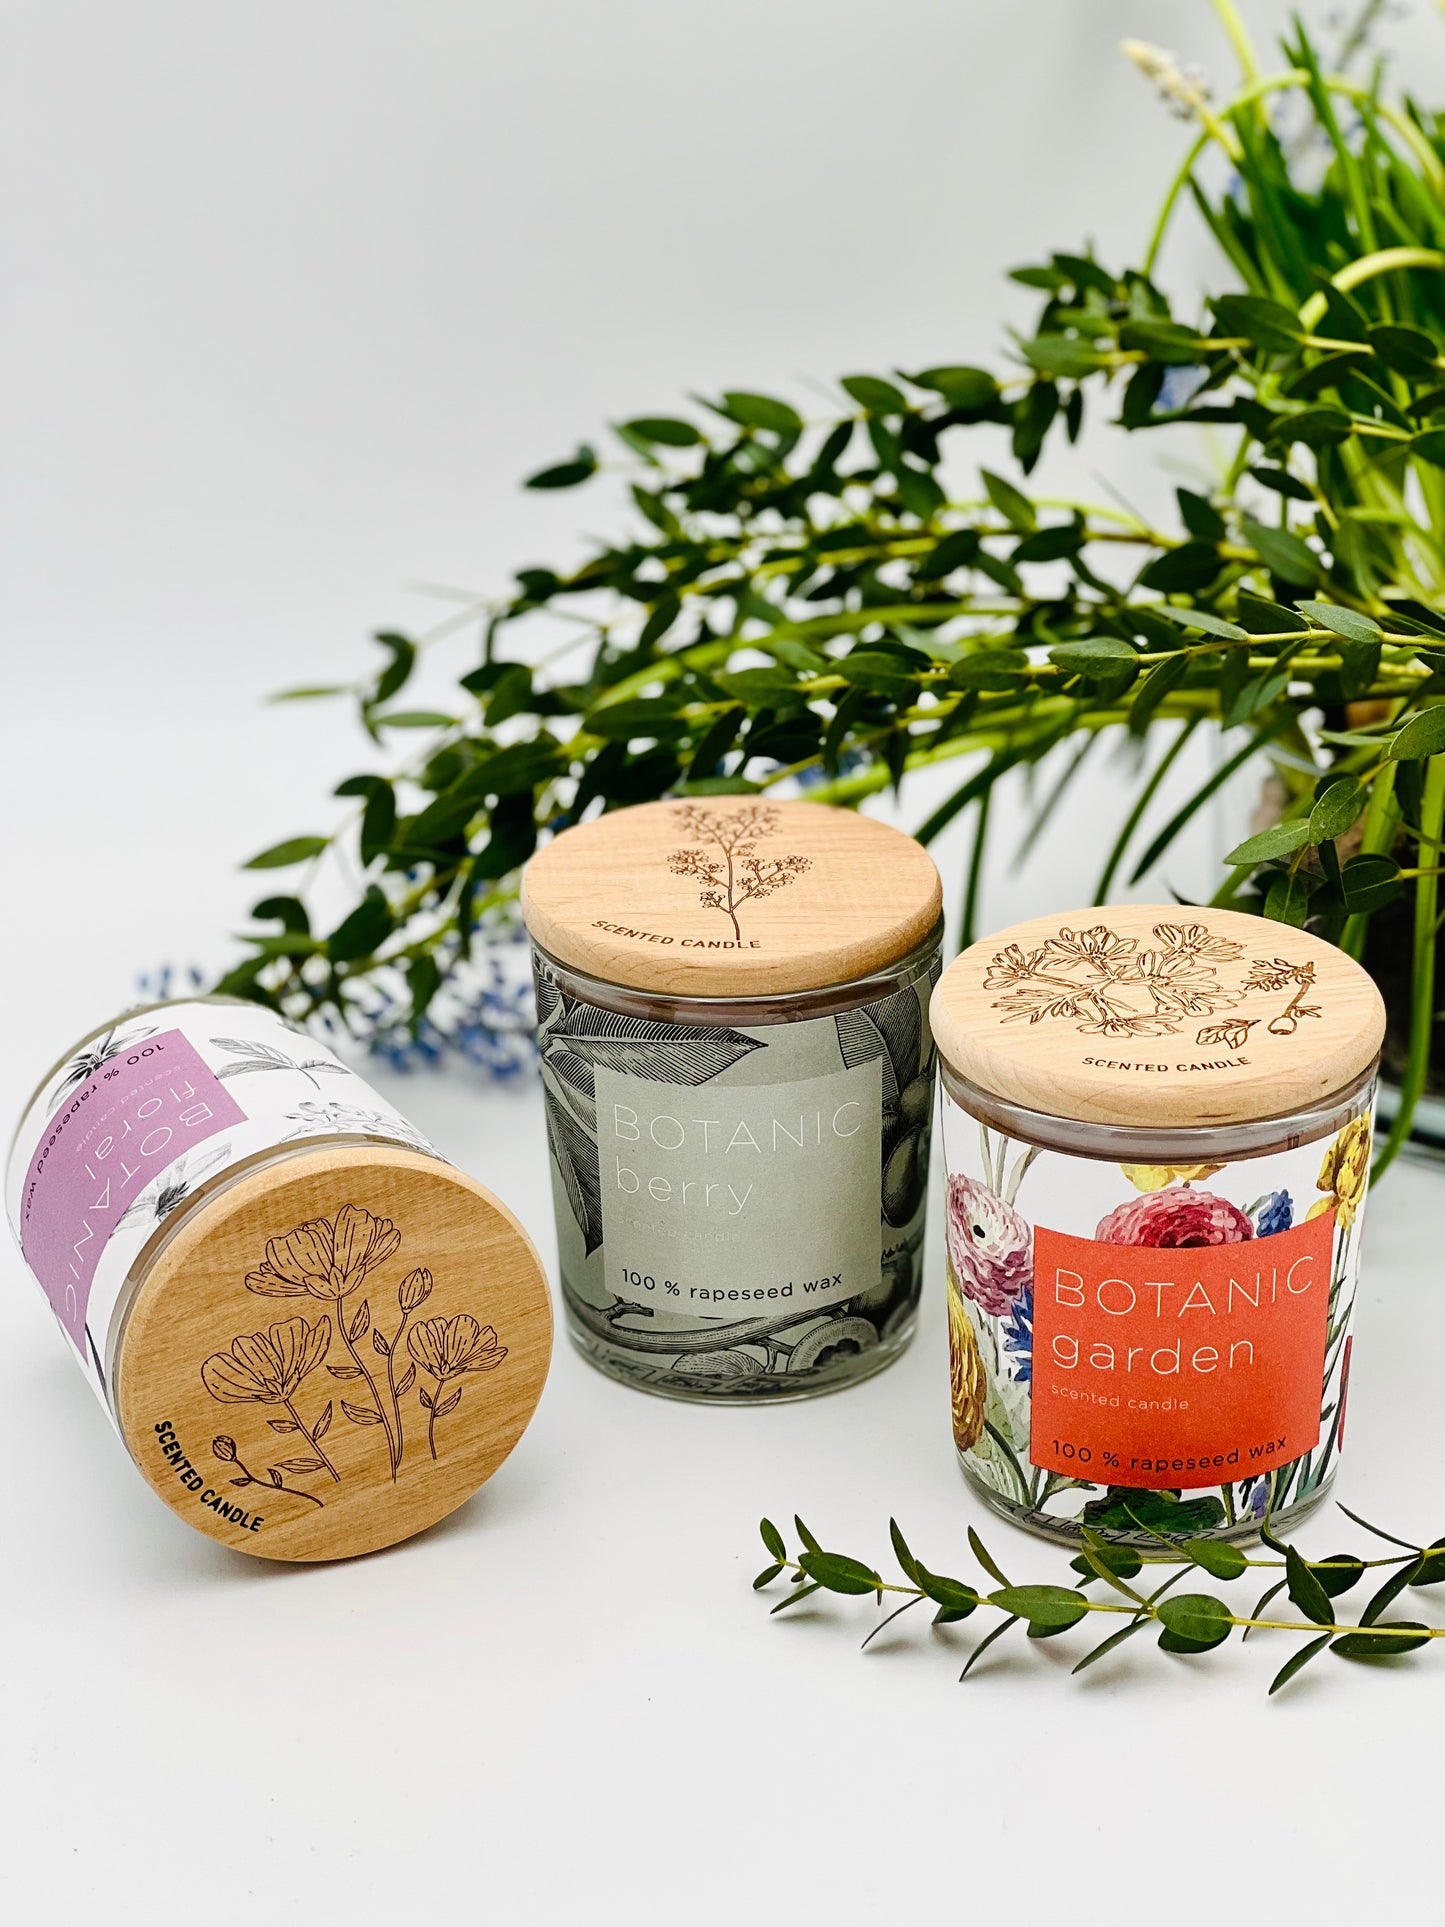 "BOTANIC" scented candle collection set